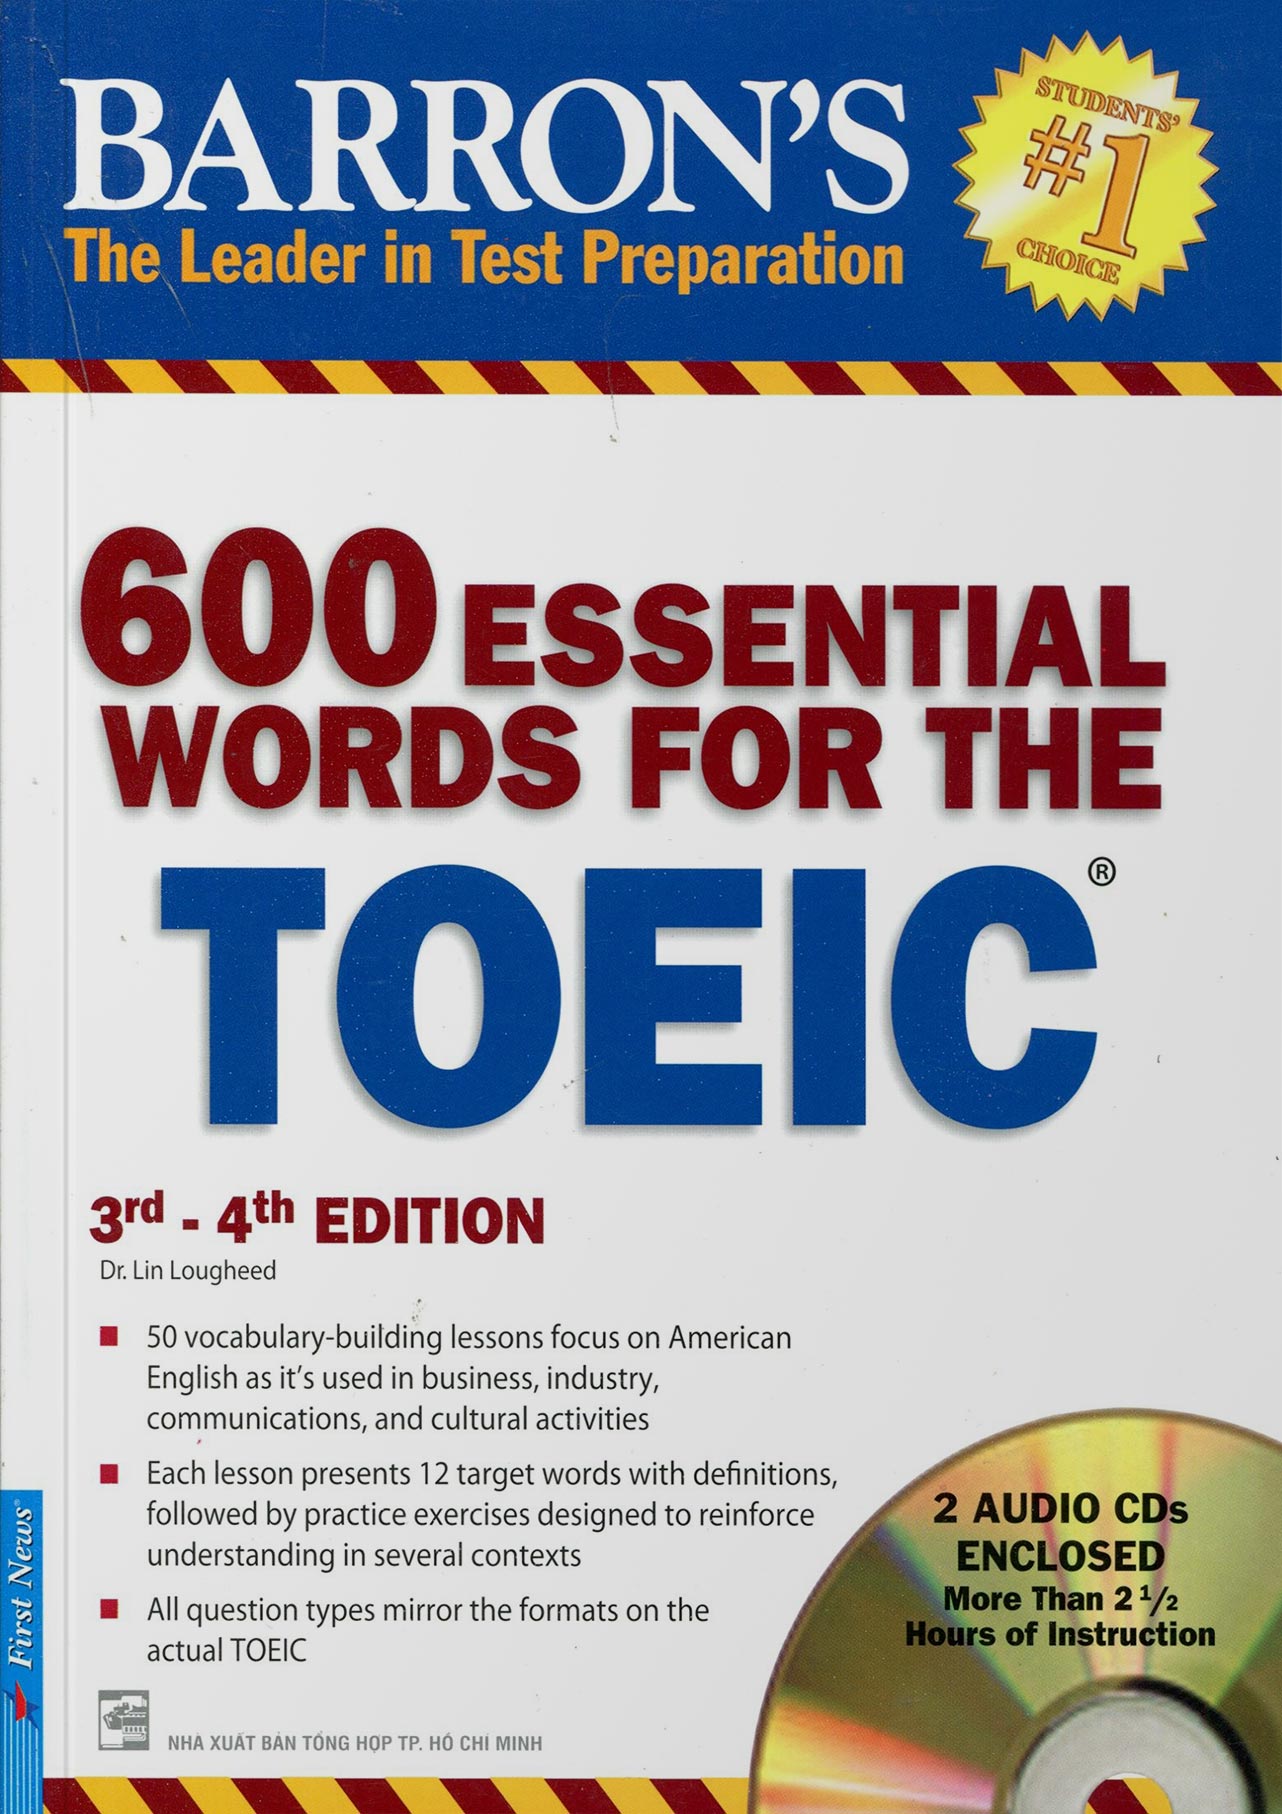 600-essential-words-for-the-TOEIC